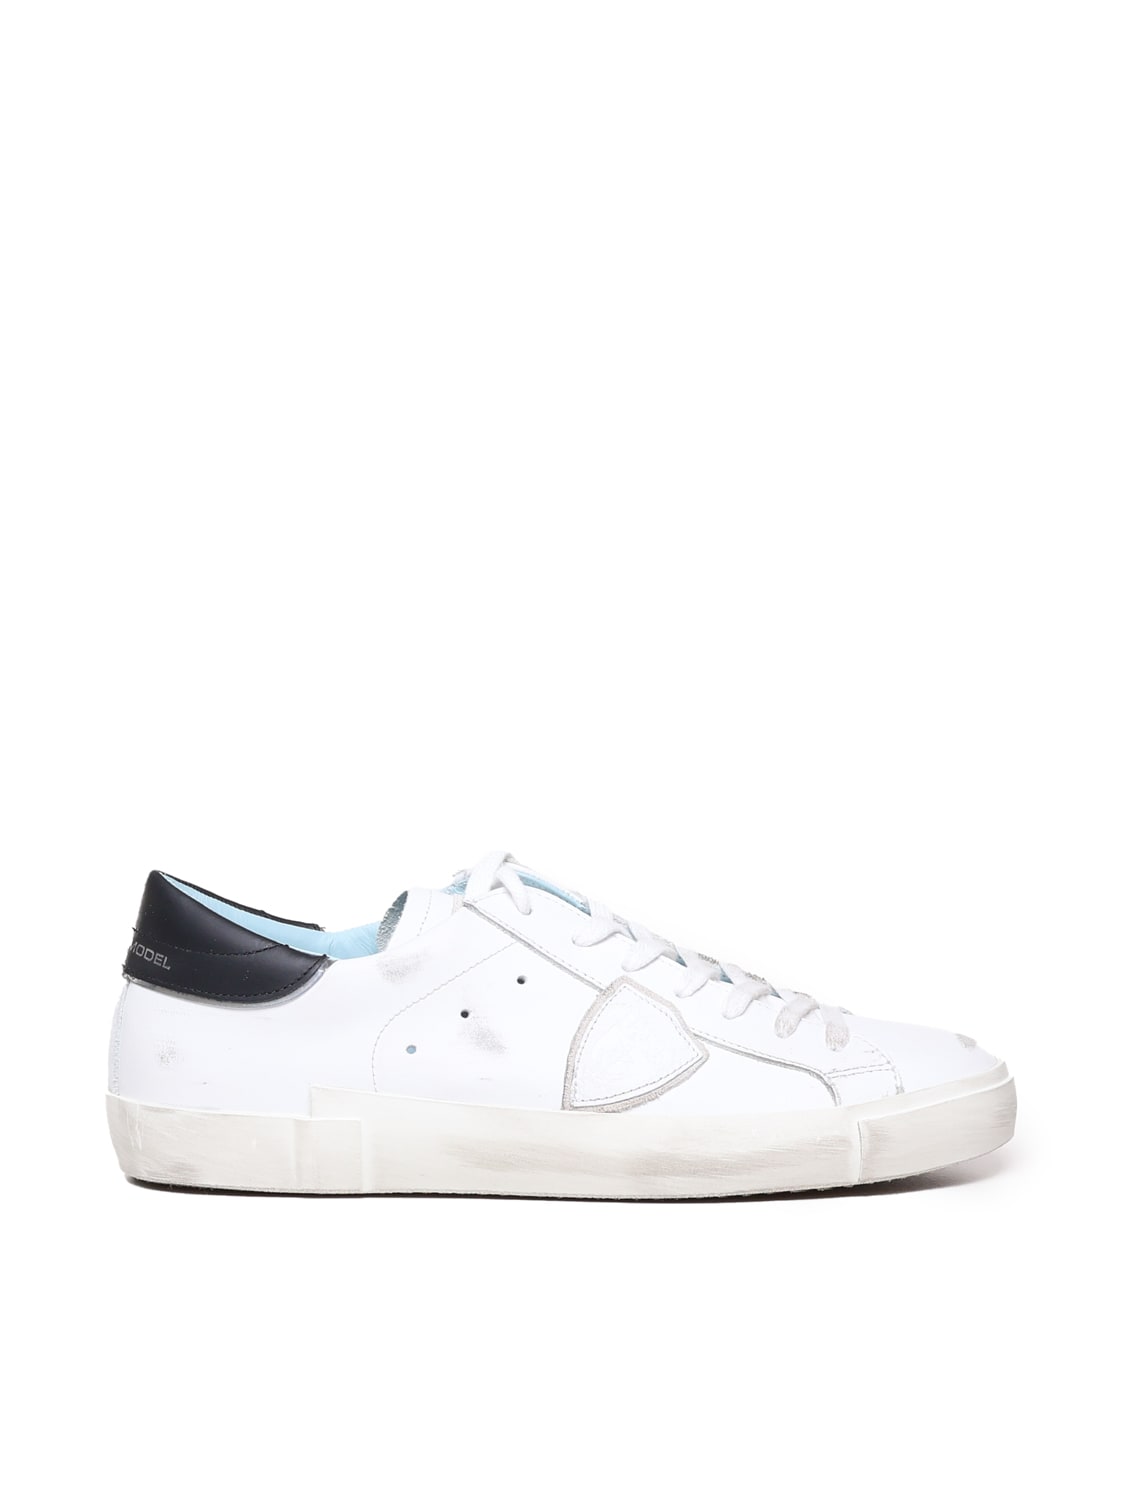 Parisx Sneakers In Leather